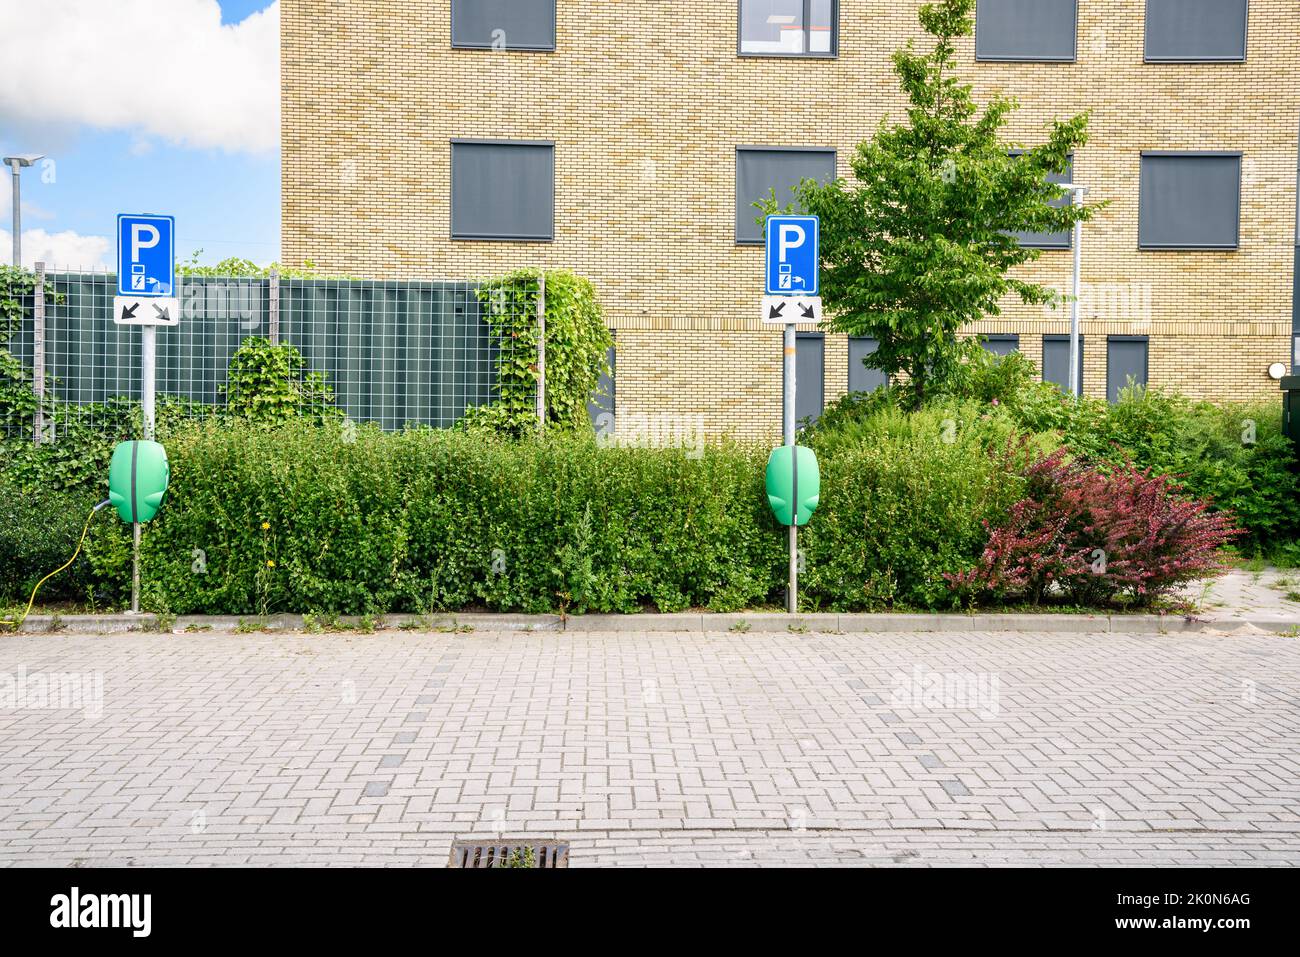 Deserted charging station for electric cars in a car park. An office building is in background. Stock Photo